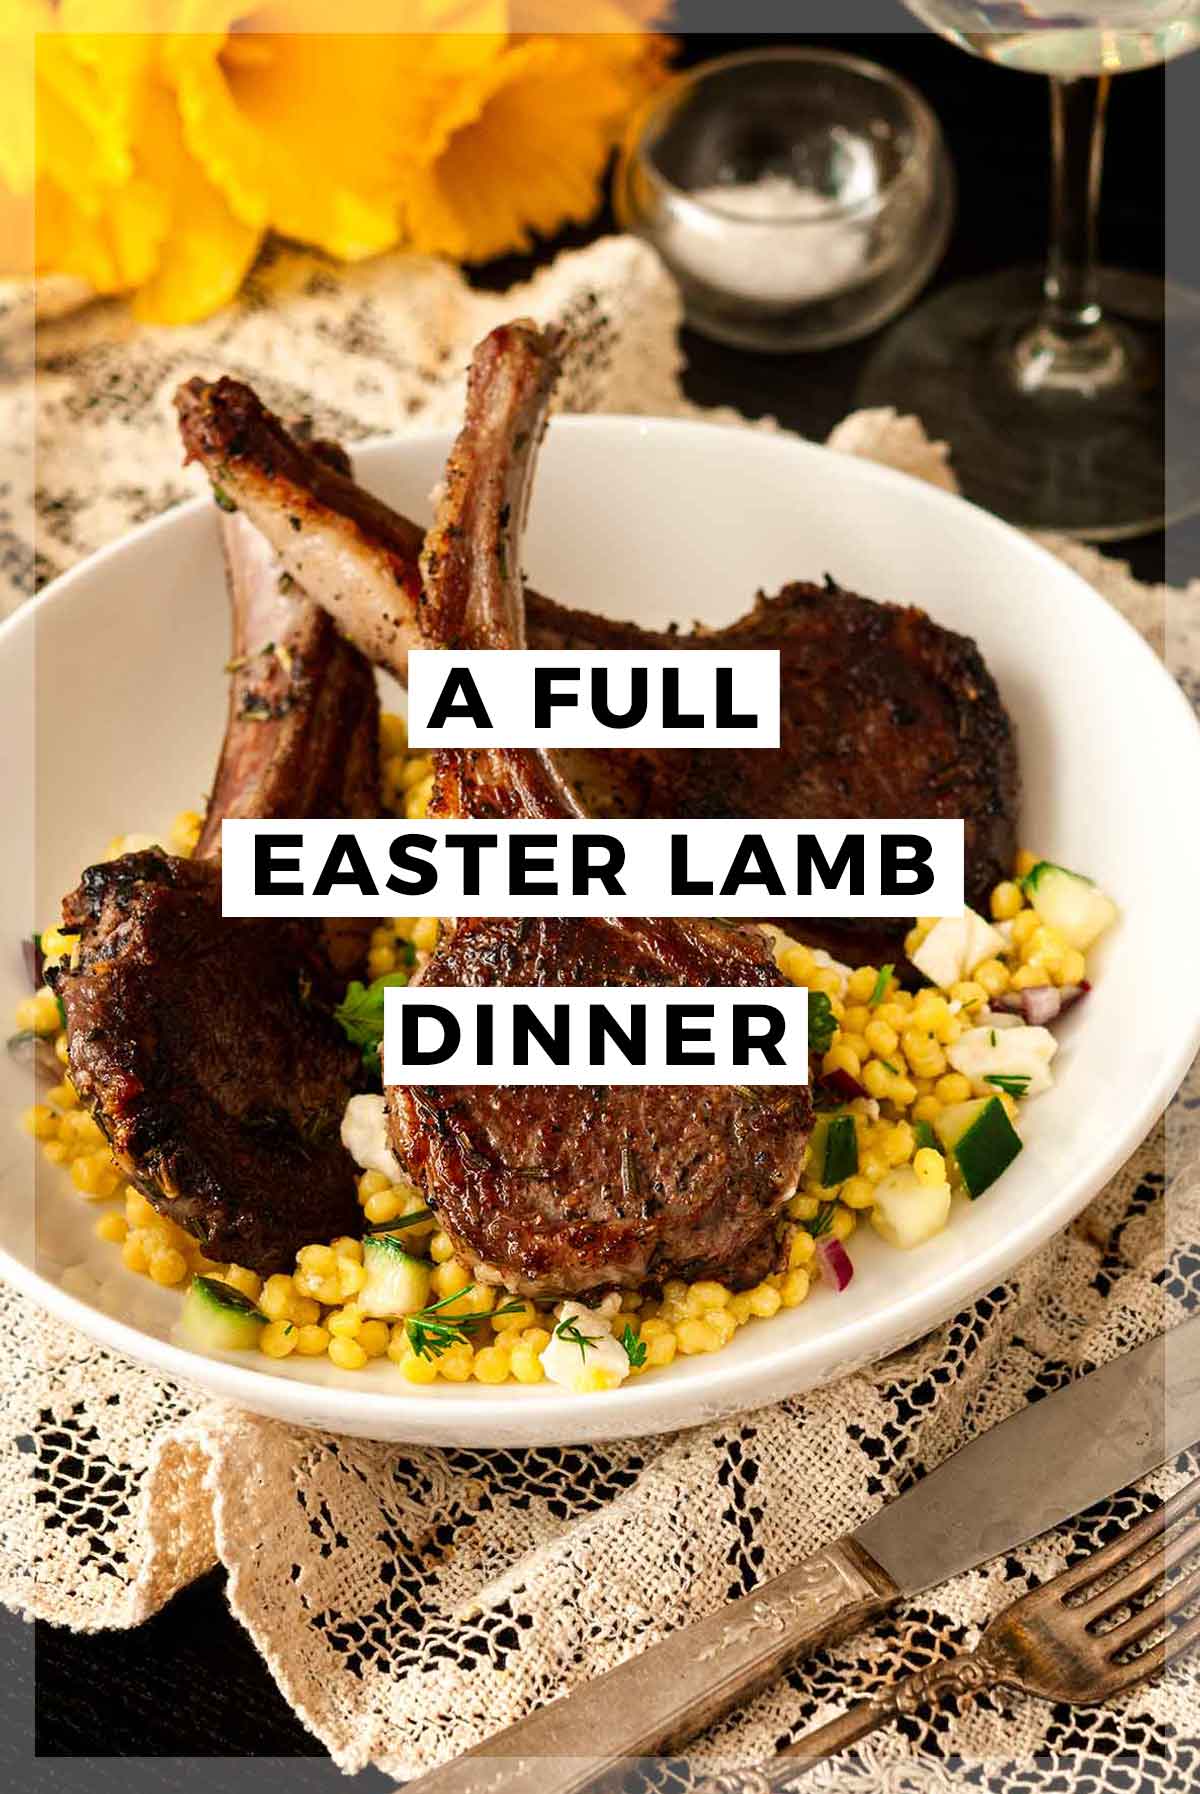 3 lamb chops in a bowl surrounded by flowers with a title that says "A Full Easter Lamb Dinner."